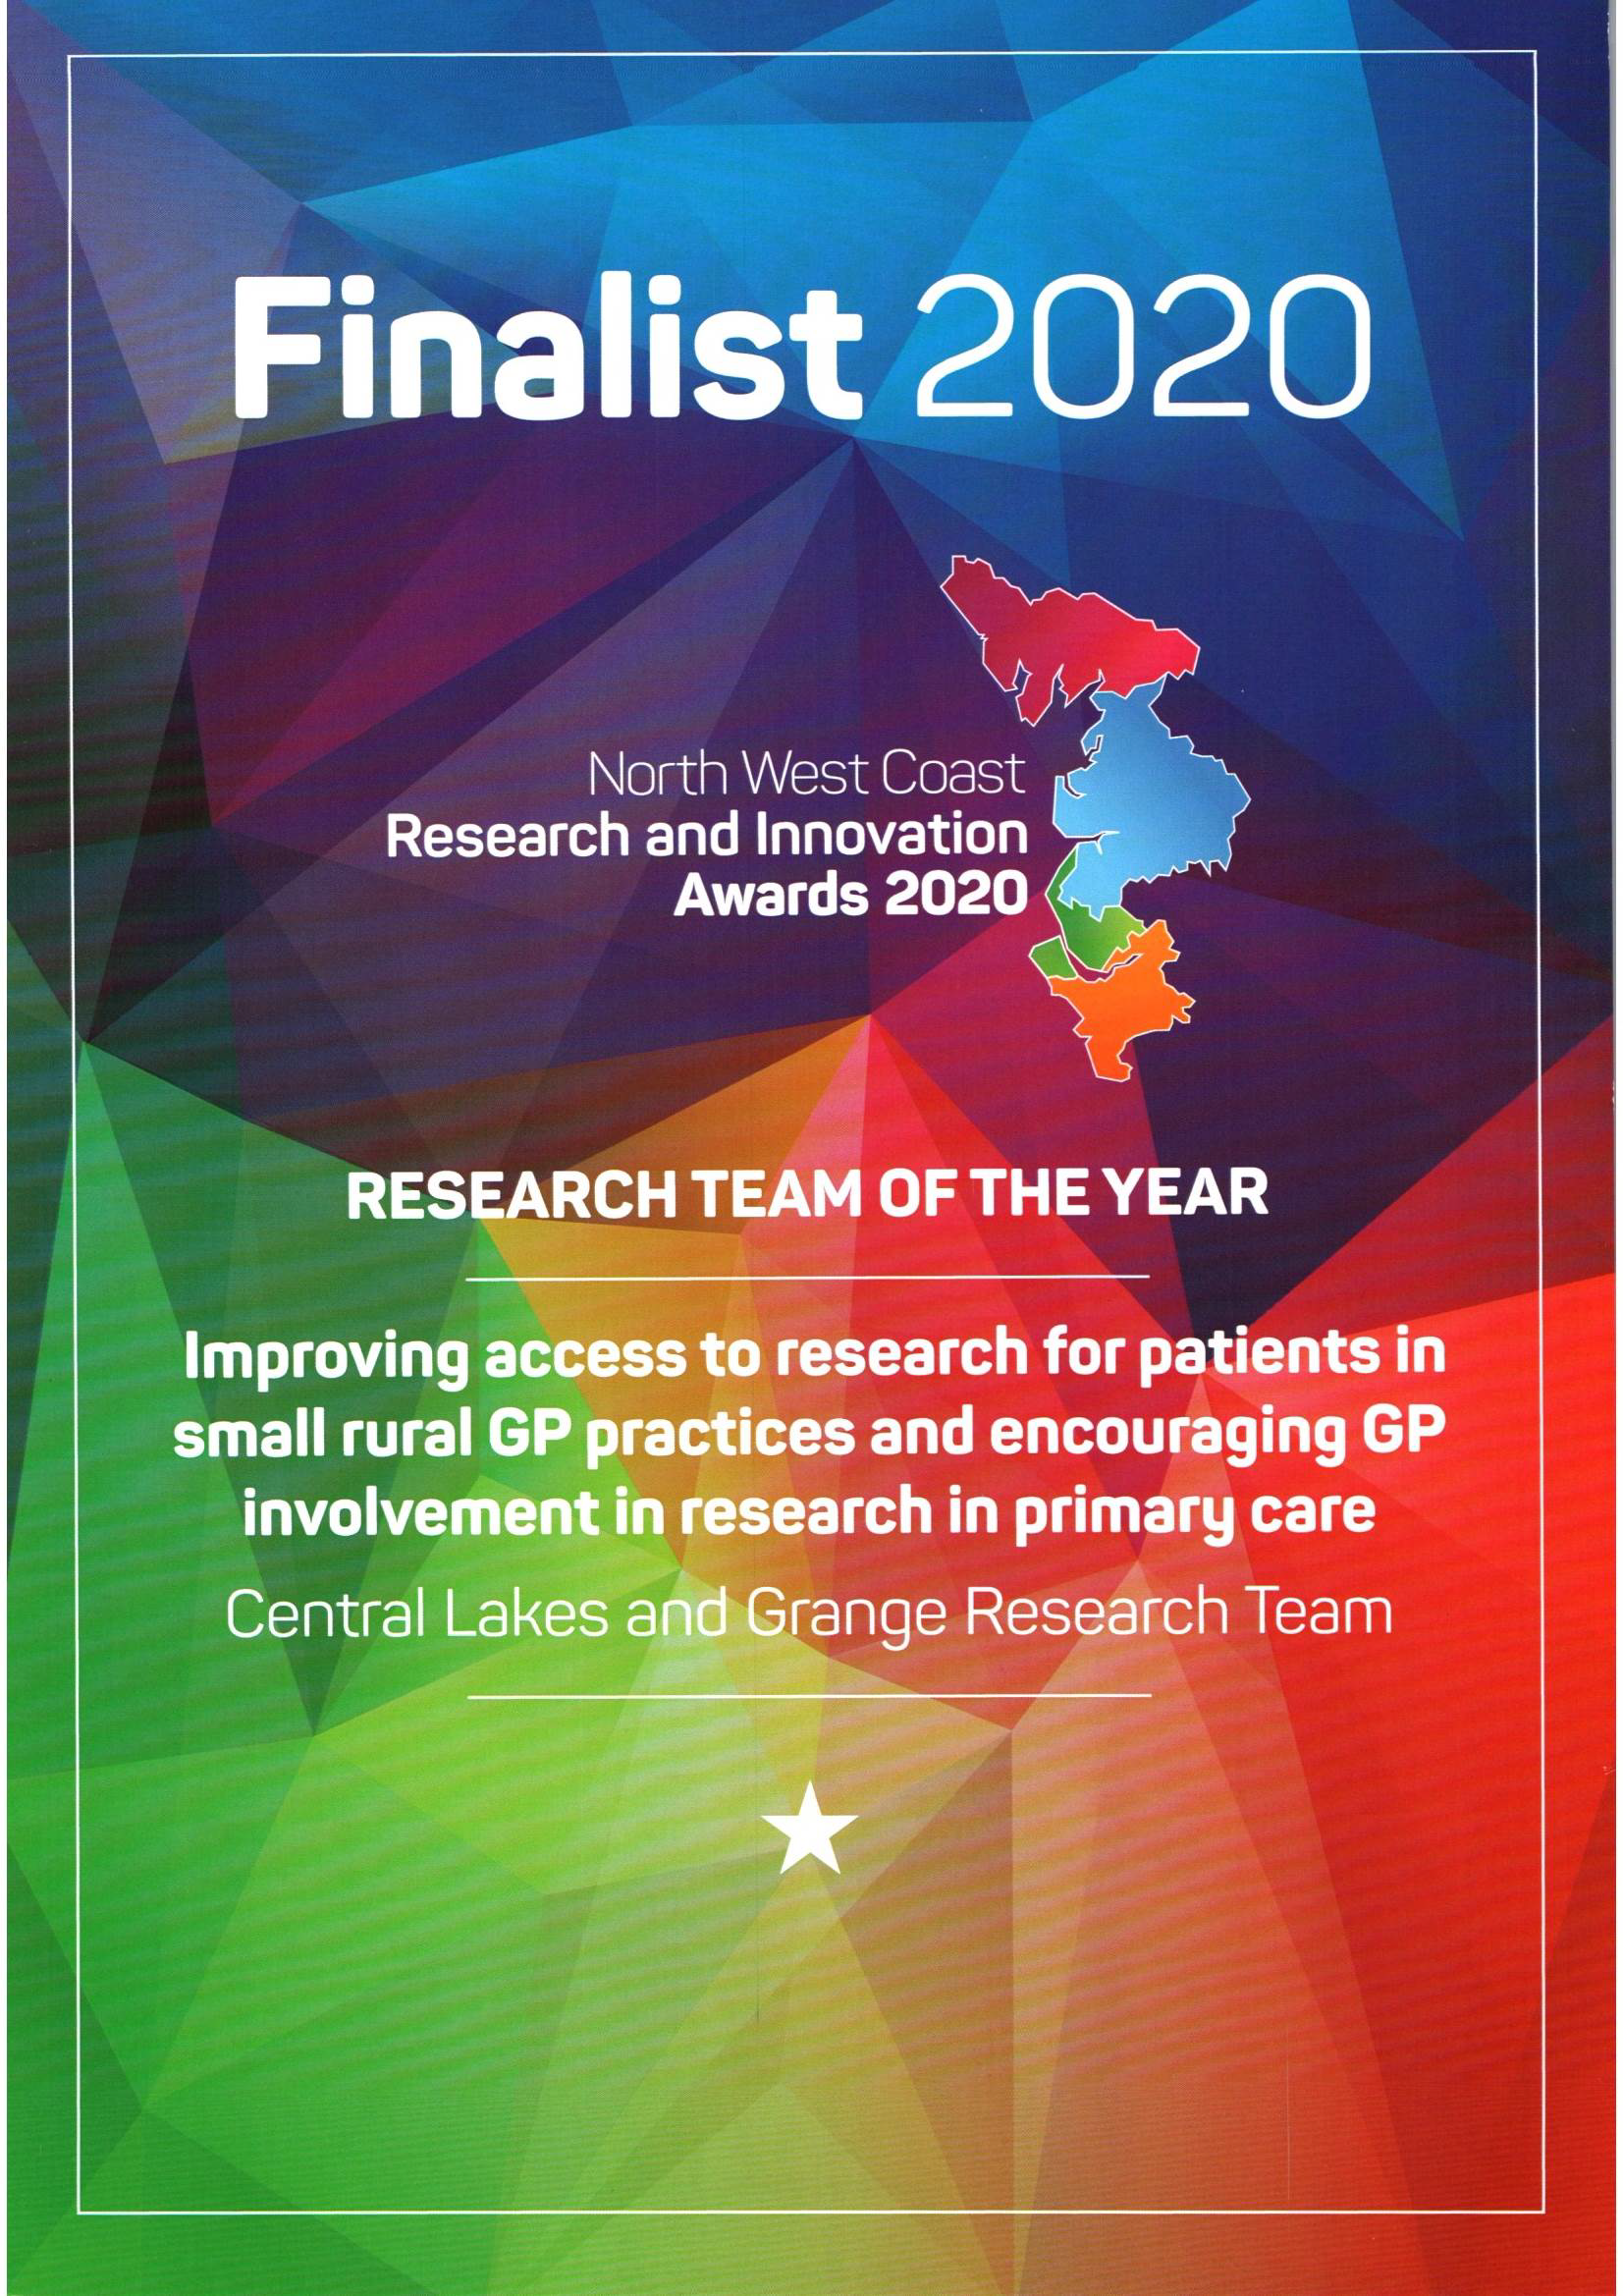 Finalist 2020 Research Team of the Year improving access to research for patients in small rural gp practices and encouraging gp involvement in research in primary care 